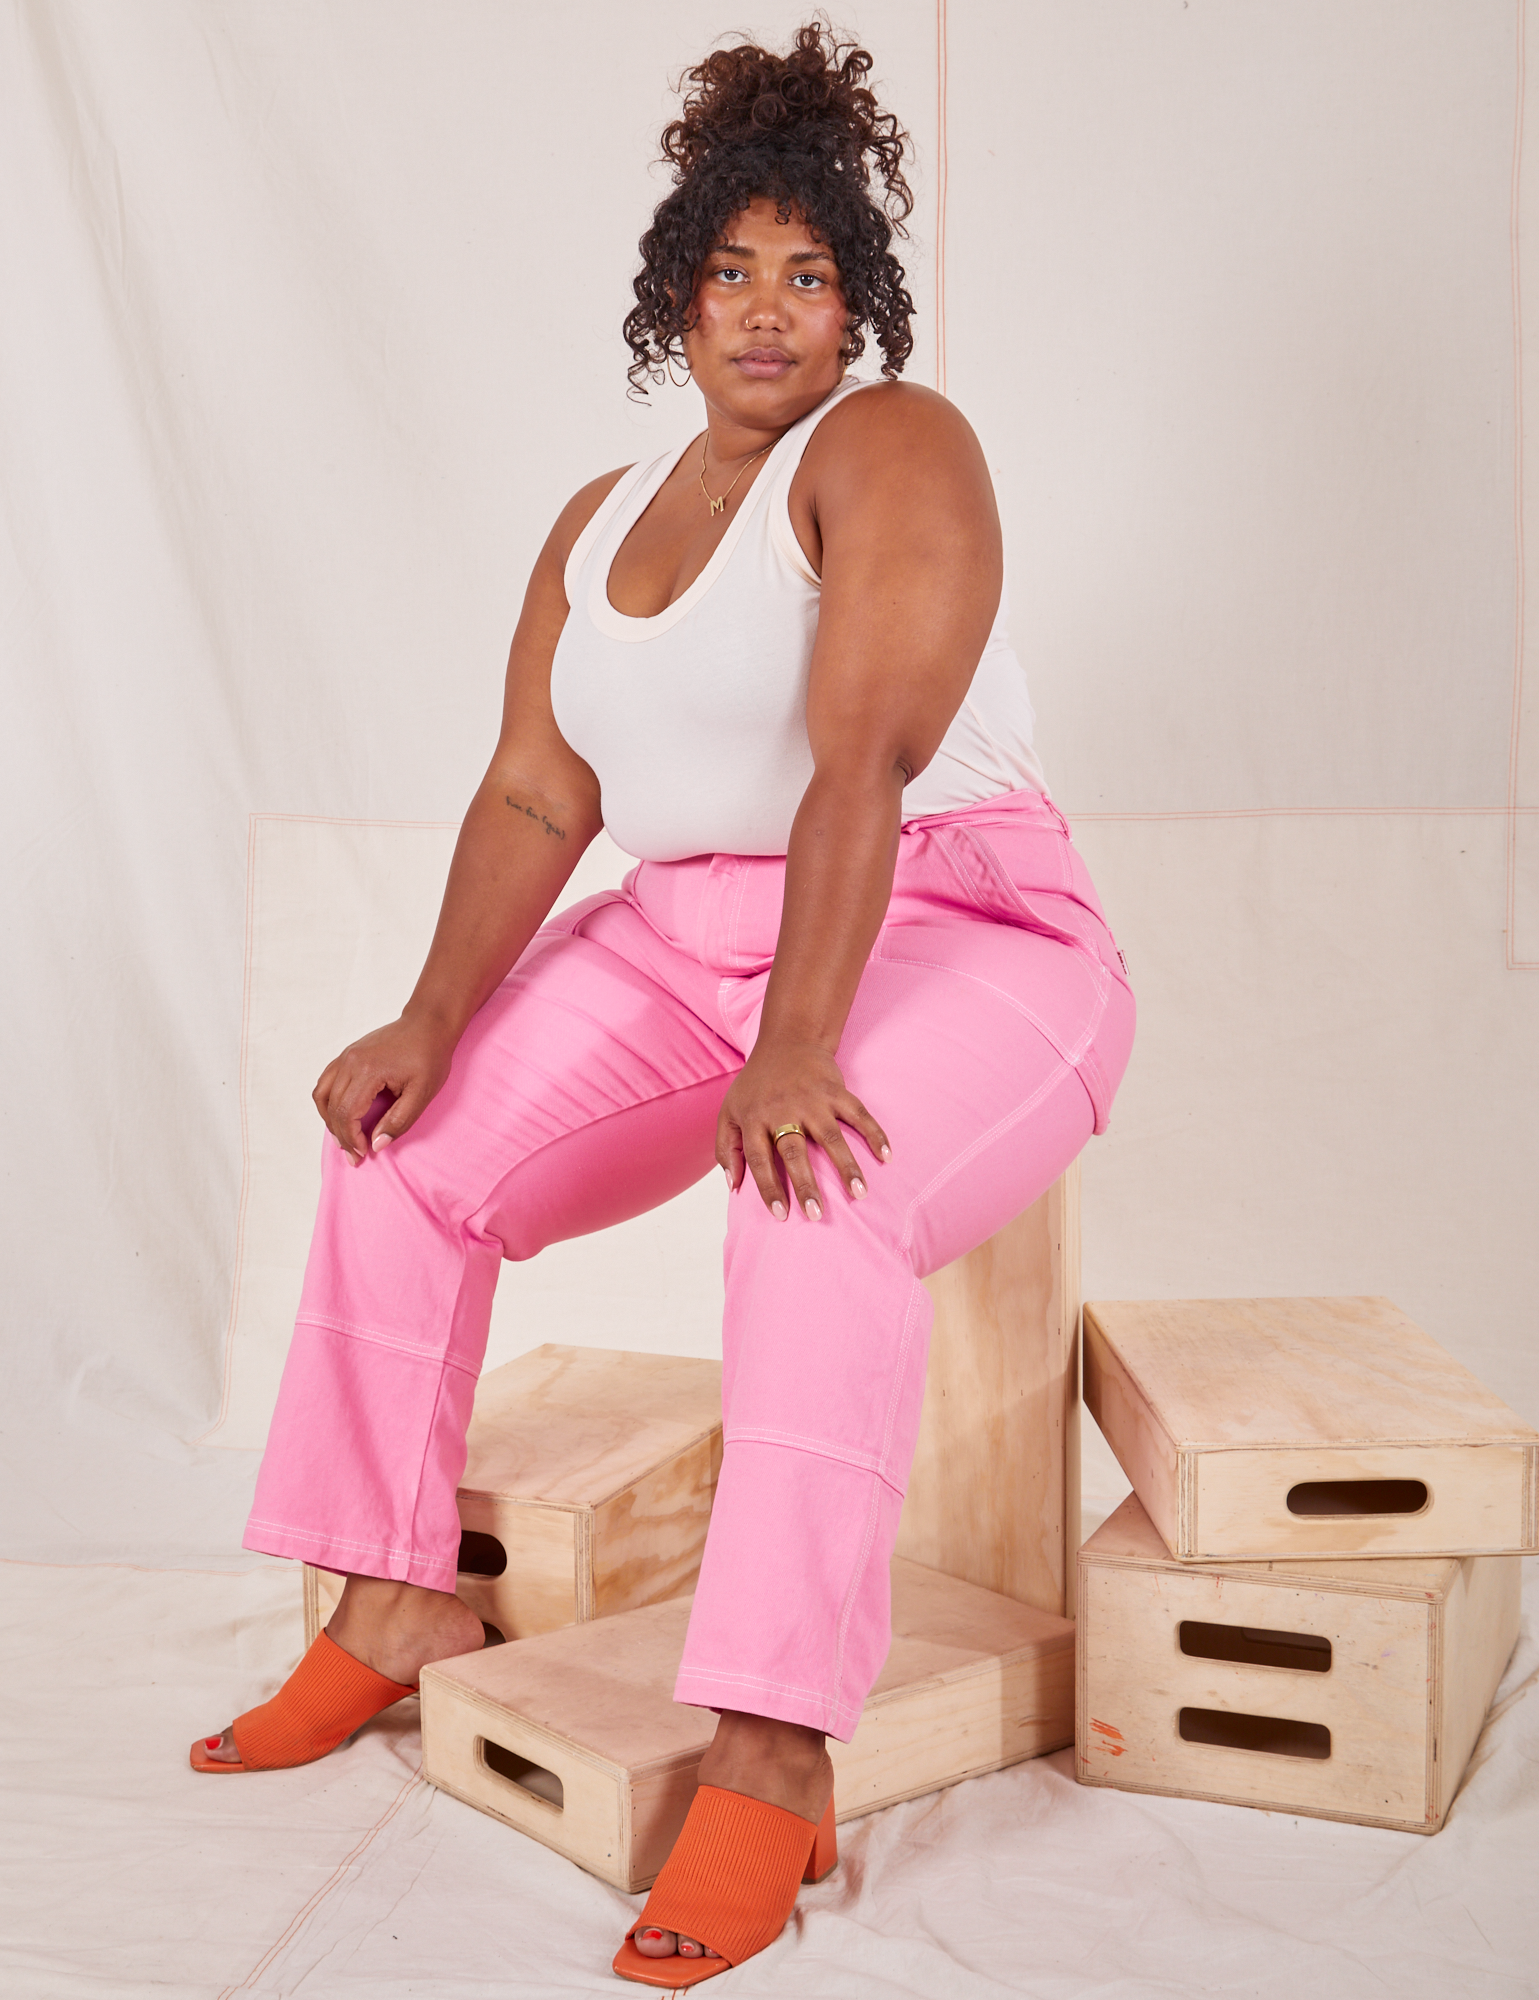 Morgan is 5'5" and wearing 1XL Carpenter Jeans in Bubblegum Pink paired with vintage off-white Tank Top